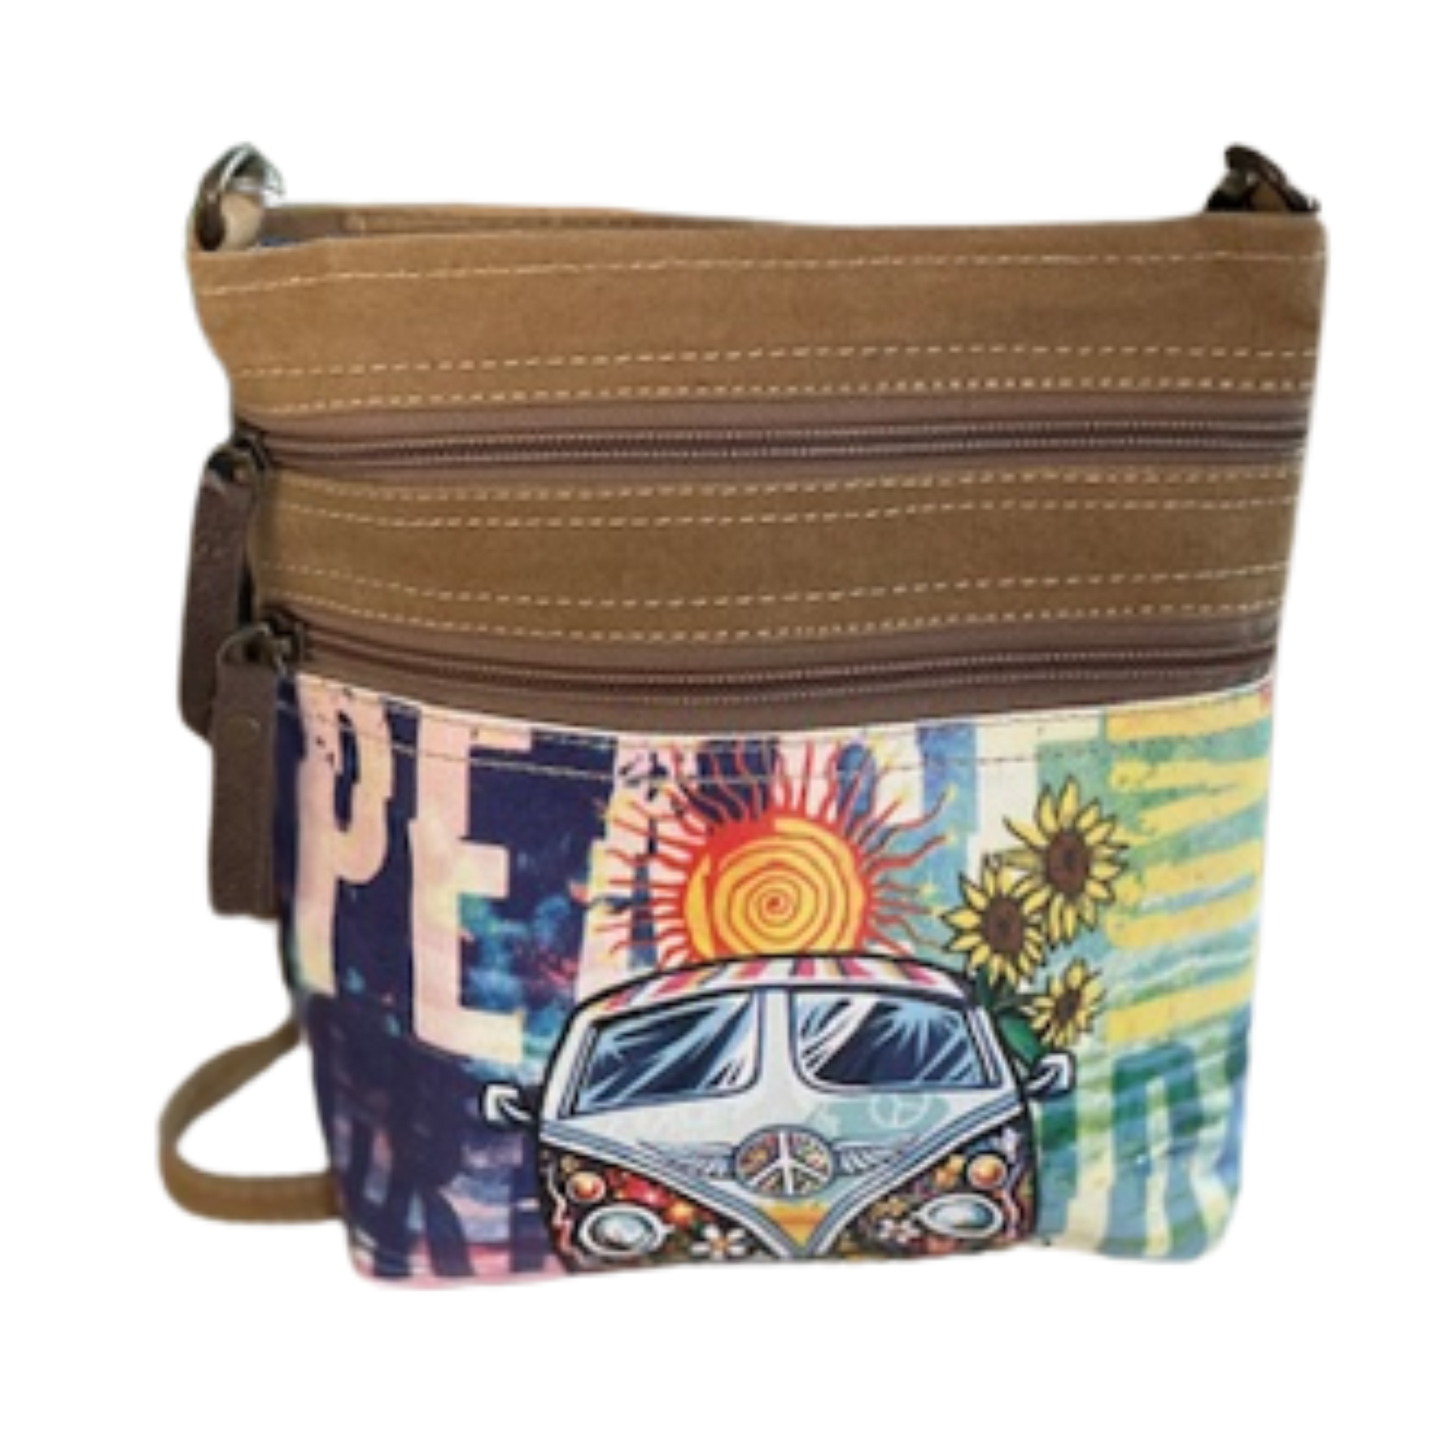 New! Vintage Hippie Van Small Canvas Bag Crossbody Purse ~ Peace with a Little Sunshine and Flower Power!